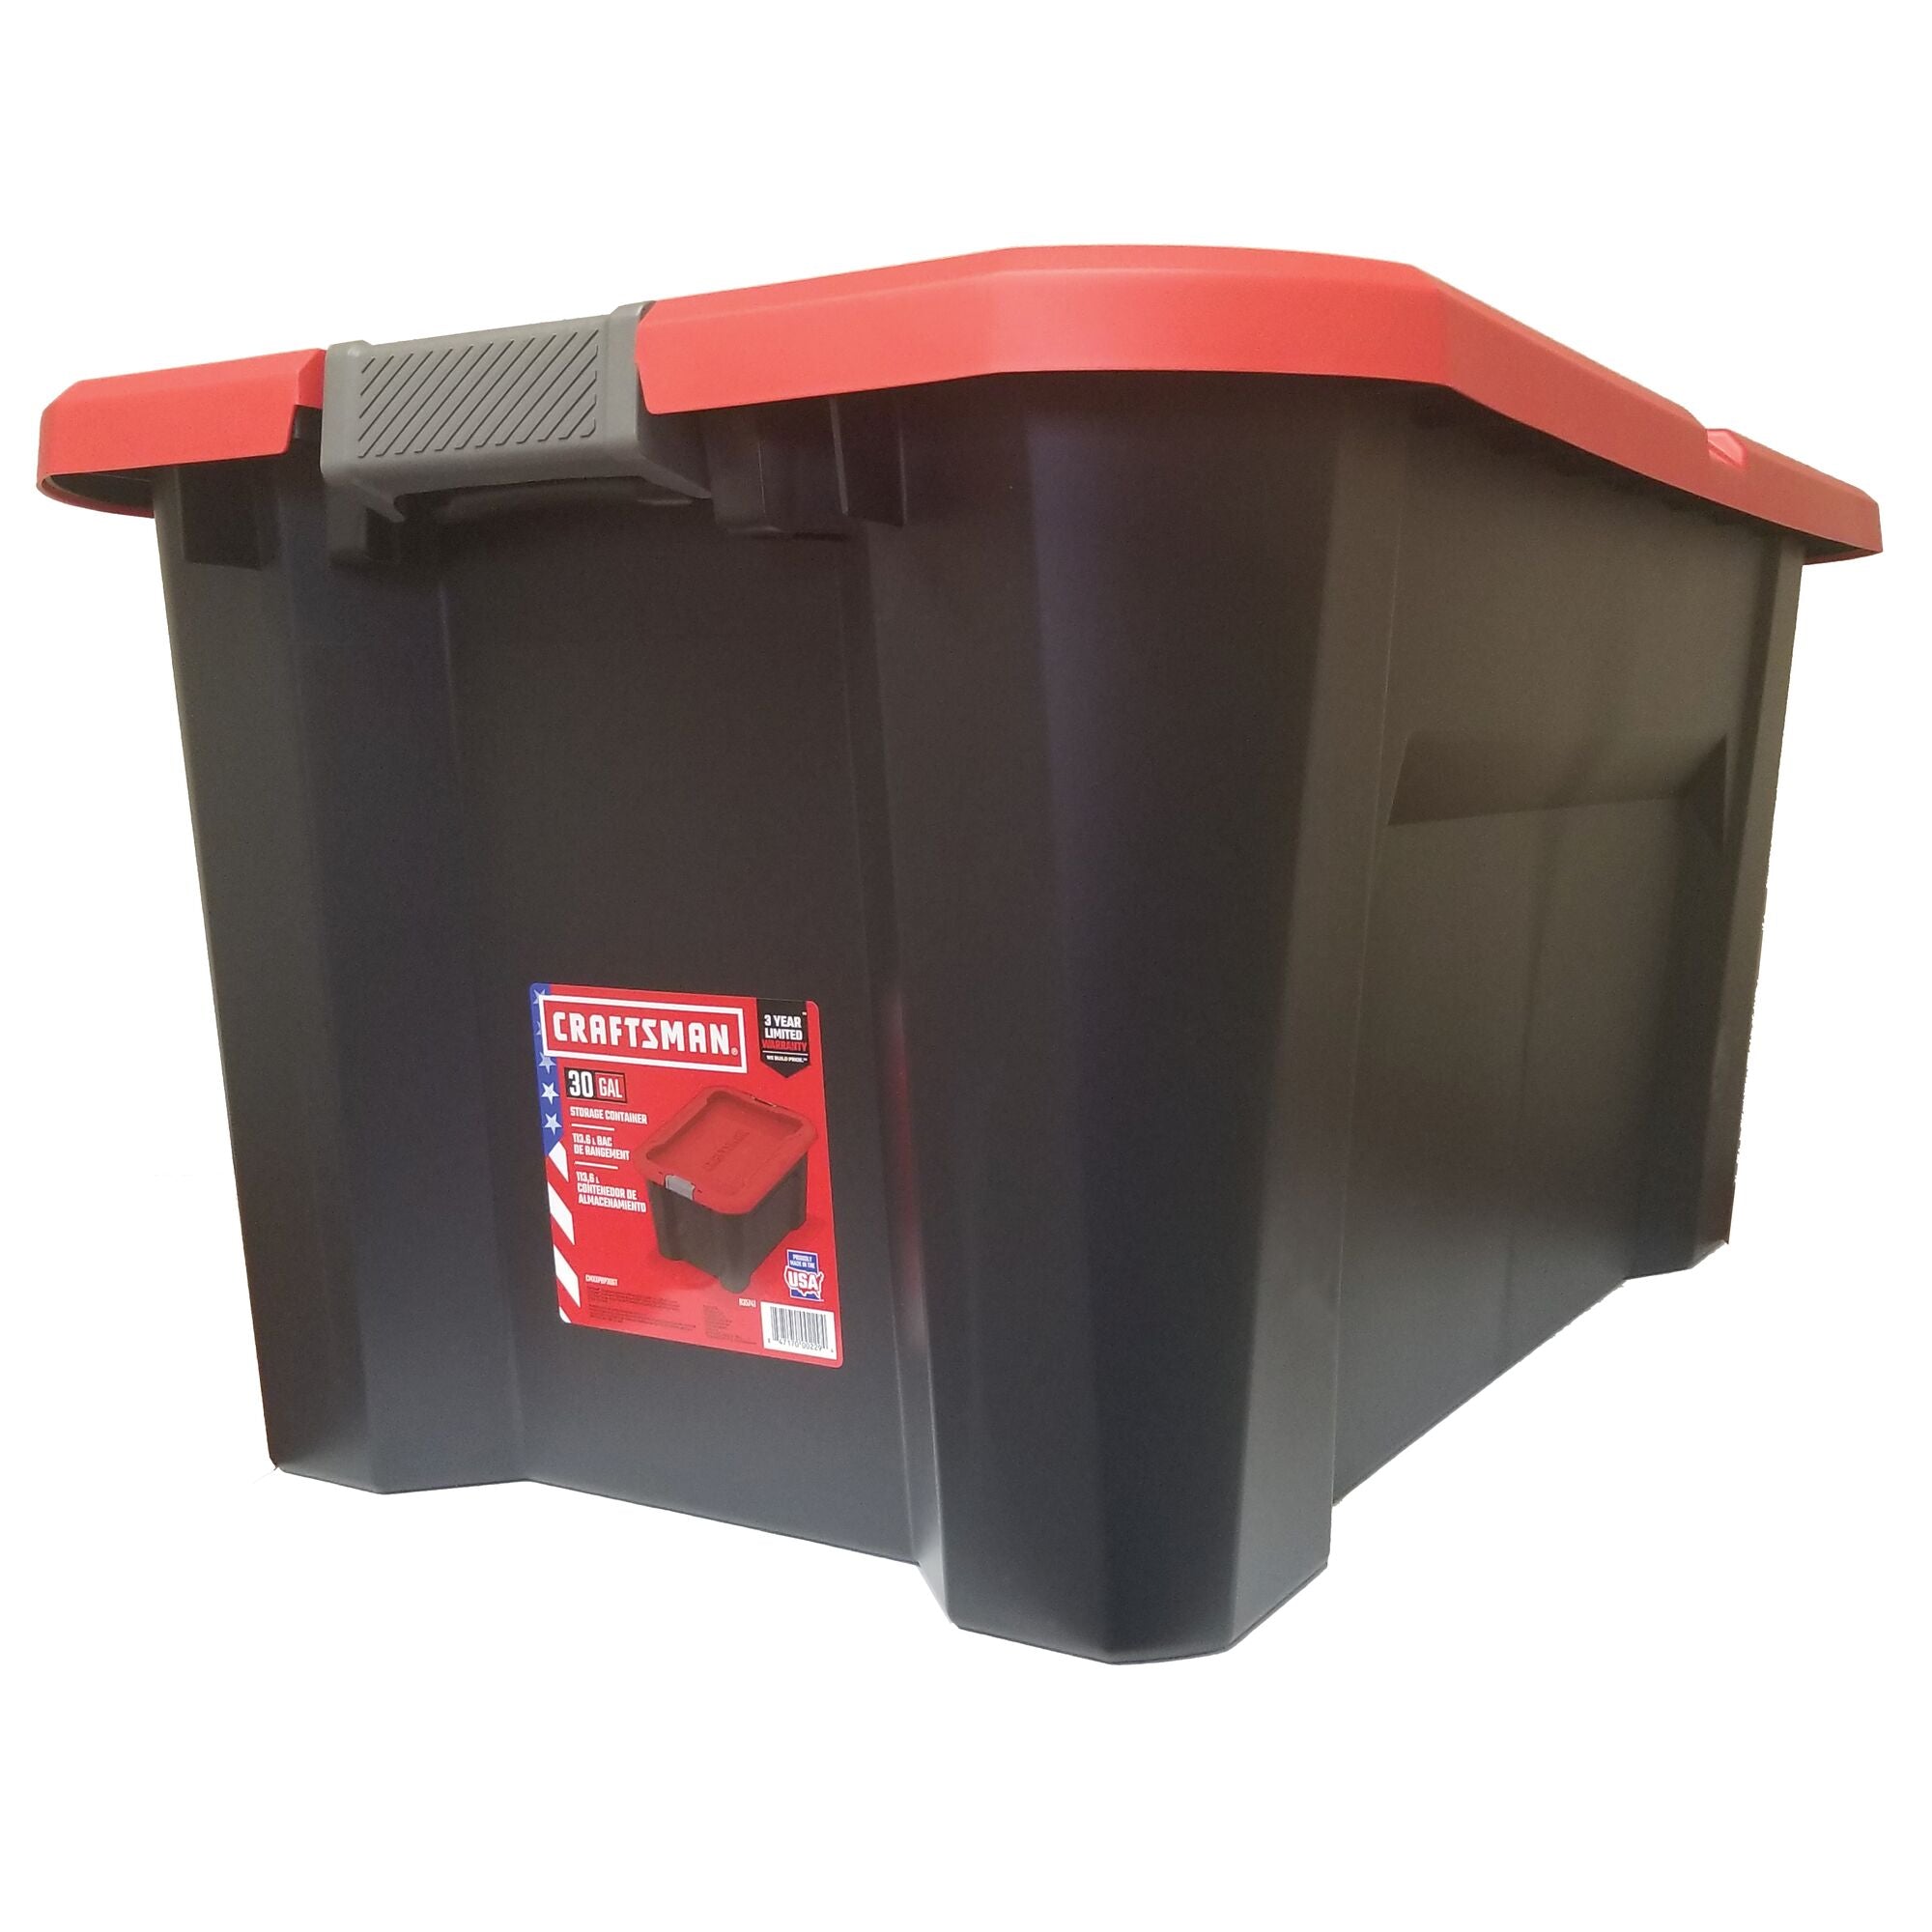 CX CRAFTSMAN, 30-Gallon Highly Durable Storage Bin & Dual Latching Lid,  (16.1”H x 21.7”W x 32.4”D), Versatile Stacking Tote and Weather-Resistant